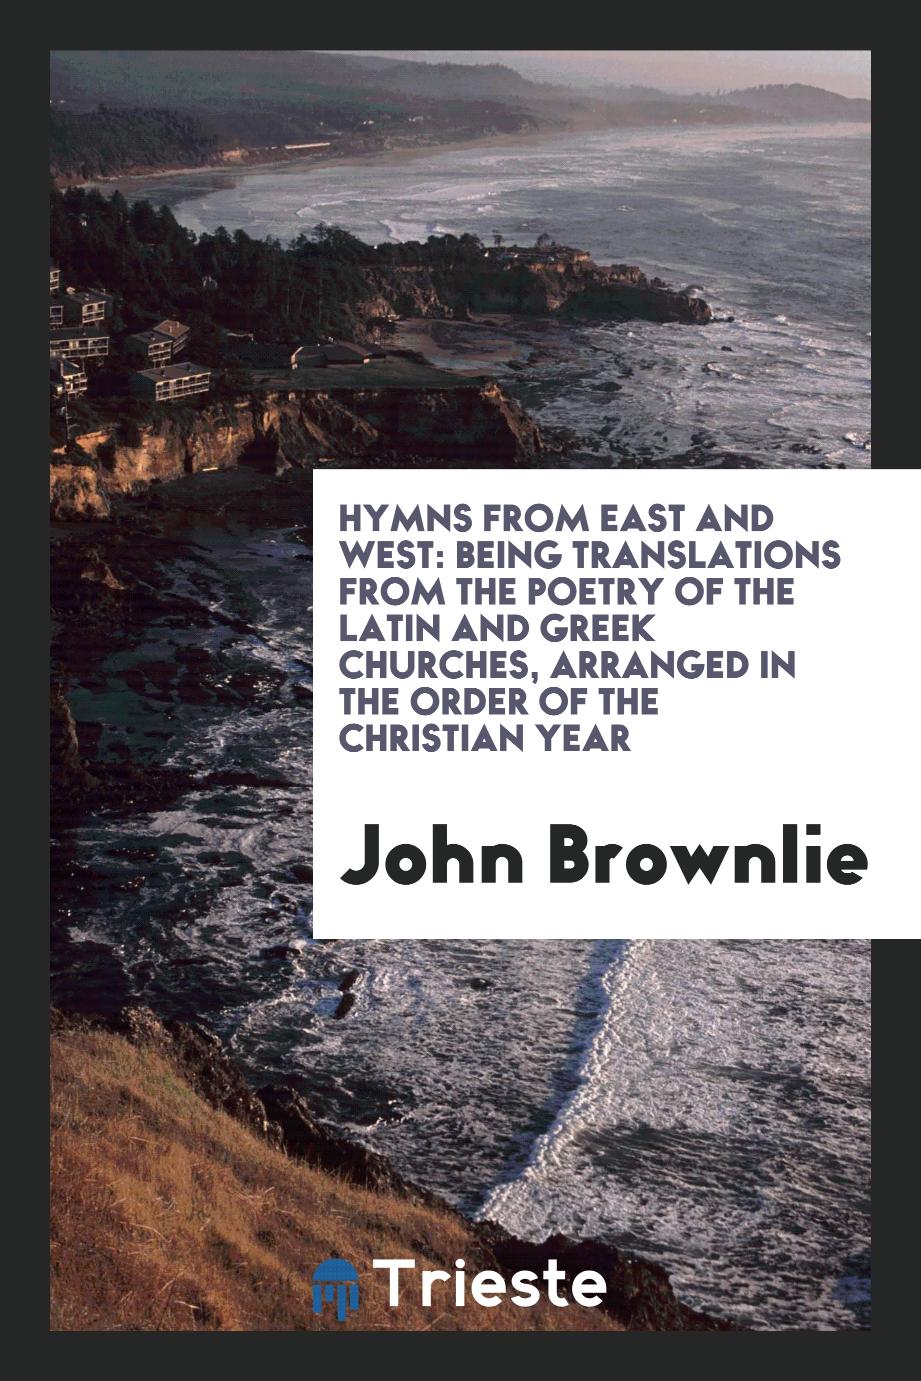 Hymns from East and West: Being Translations from the Poetry of the Latin and Greek Churches, Arranged in the Order of the Christian Year